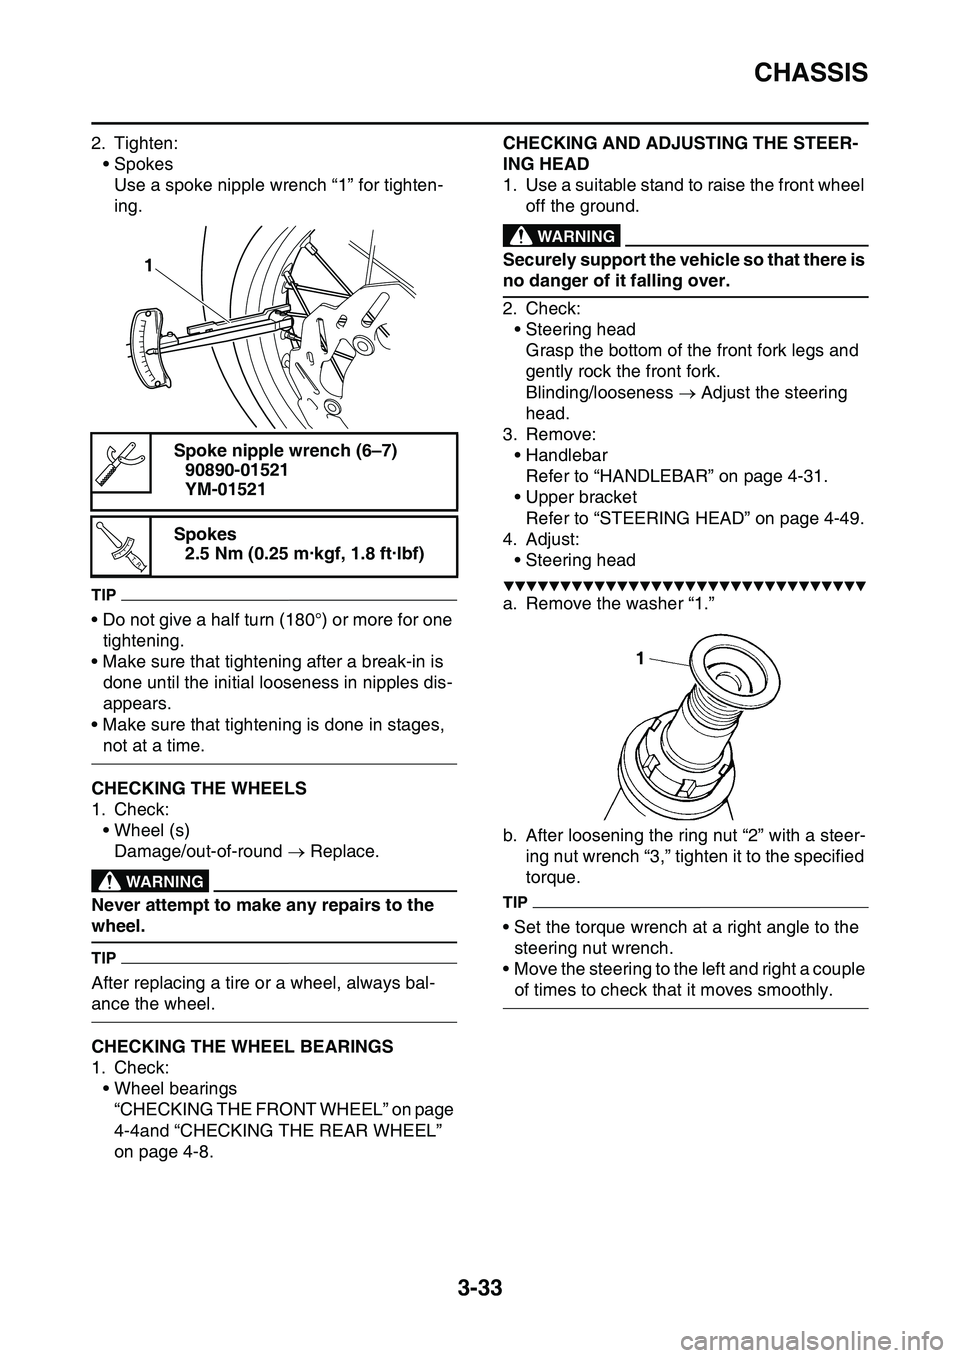 YAMAHA YZ450F 2014  Owners Manual CHASSIS
3-33
2. Tighten:
• Spokes
Use a spoke nipple wrench “1” for tighten-
ing.
TIP
• Do not give a half turn (180°) or more for one 
tightening.
• Make sure that tightening after a break